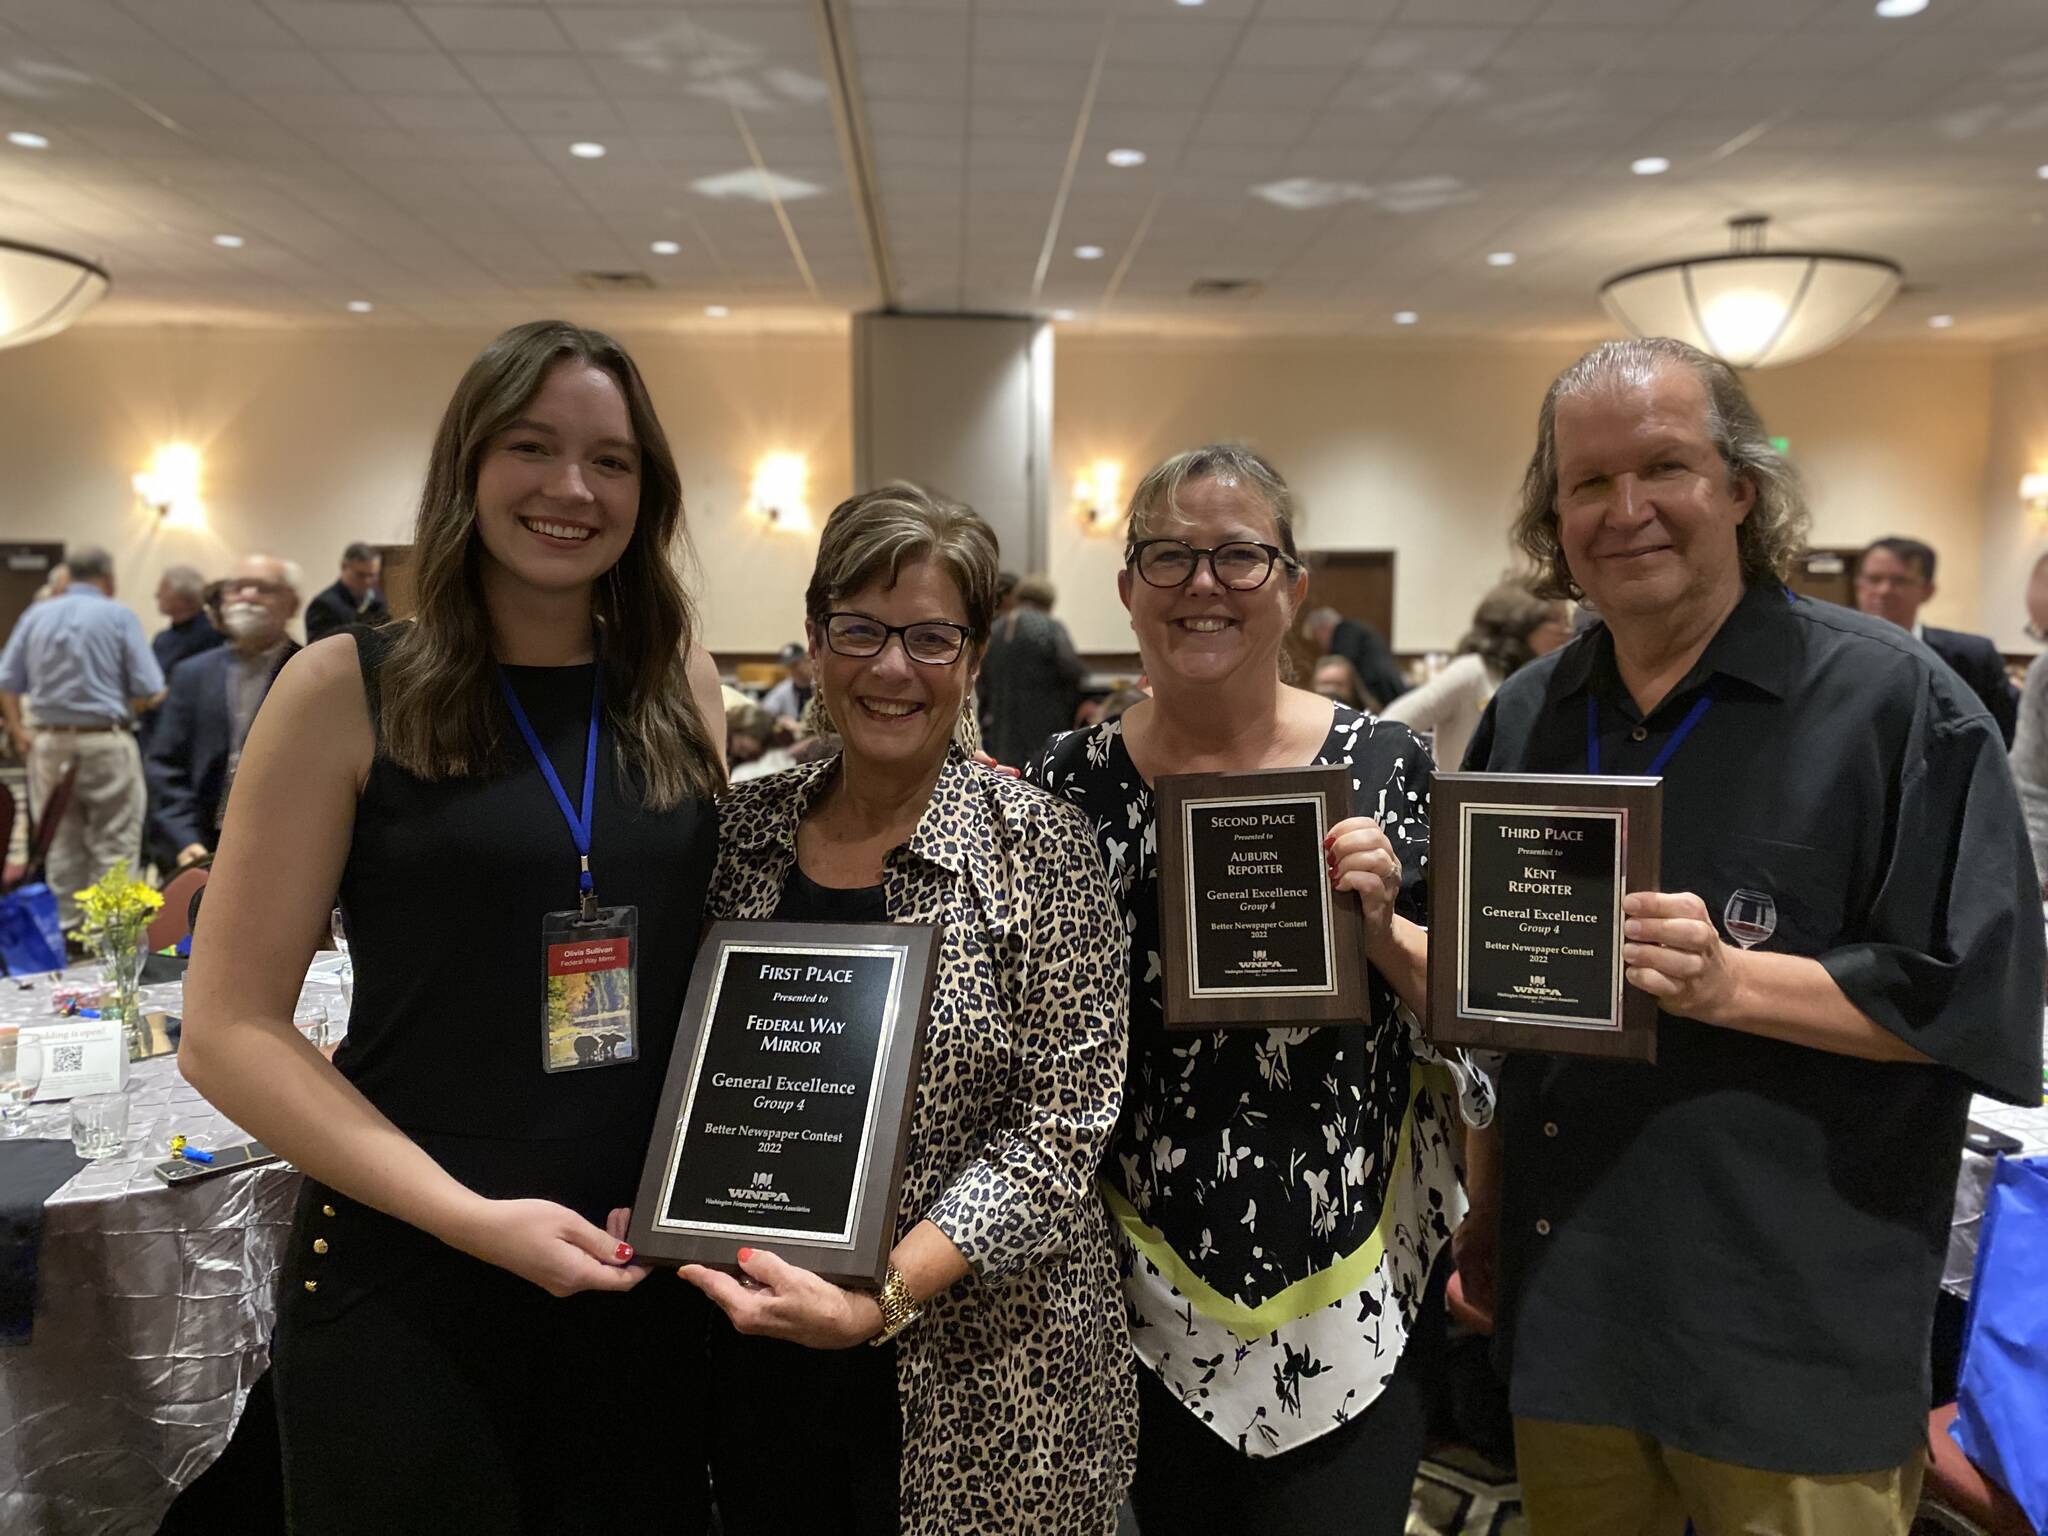 Photo by Terry Ward/Sound Publishing
From left: Assistant Editor Olivia Sullivan, Federal Way Mirror Sales Manager Cindy Ducich, Advertising Director Carol Greiling and Reporter Steve Hunter hold their General Excellence awards at the WNPA conference on Oct. 8.